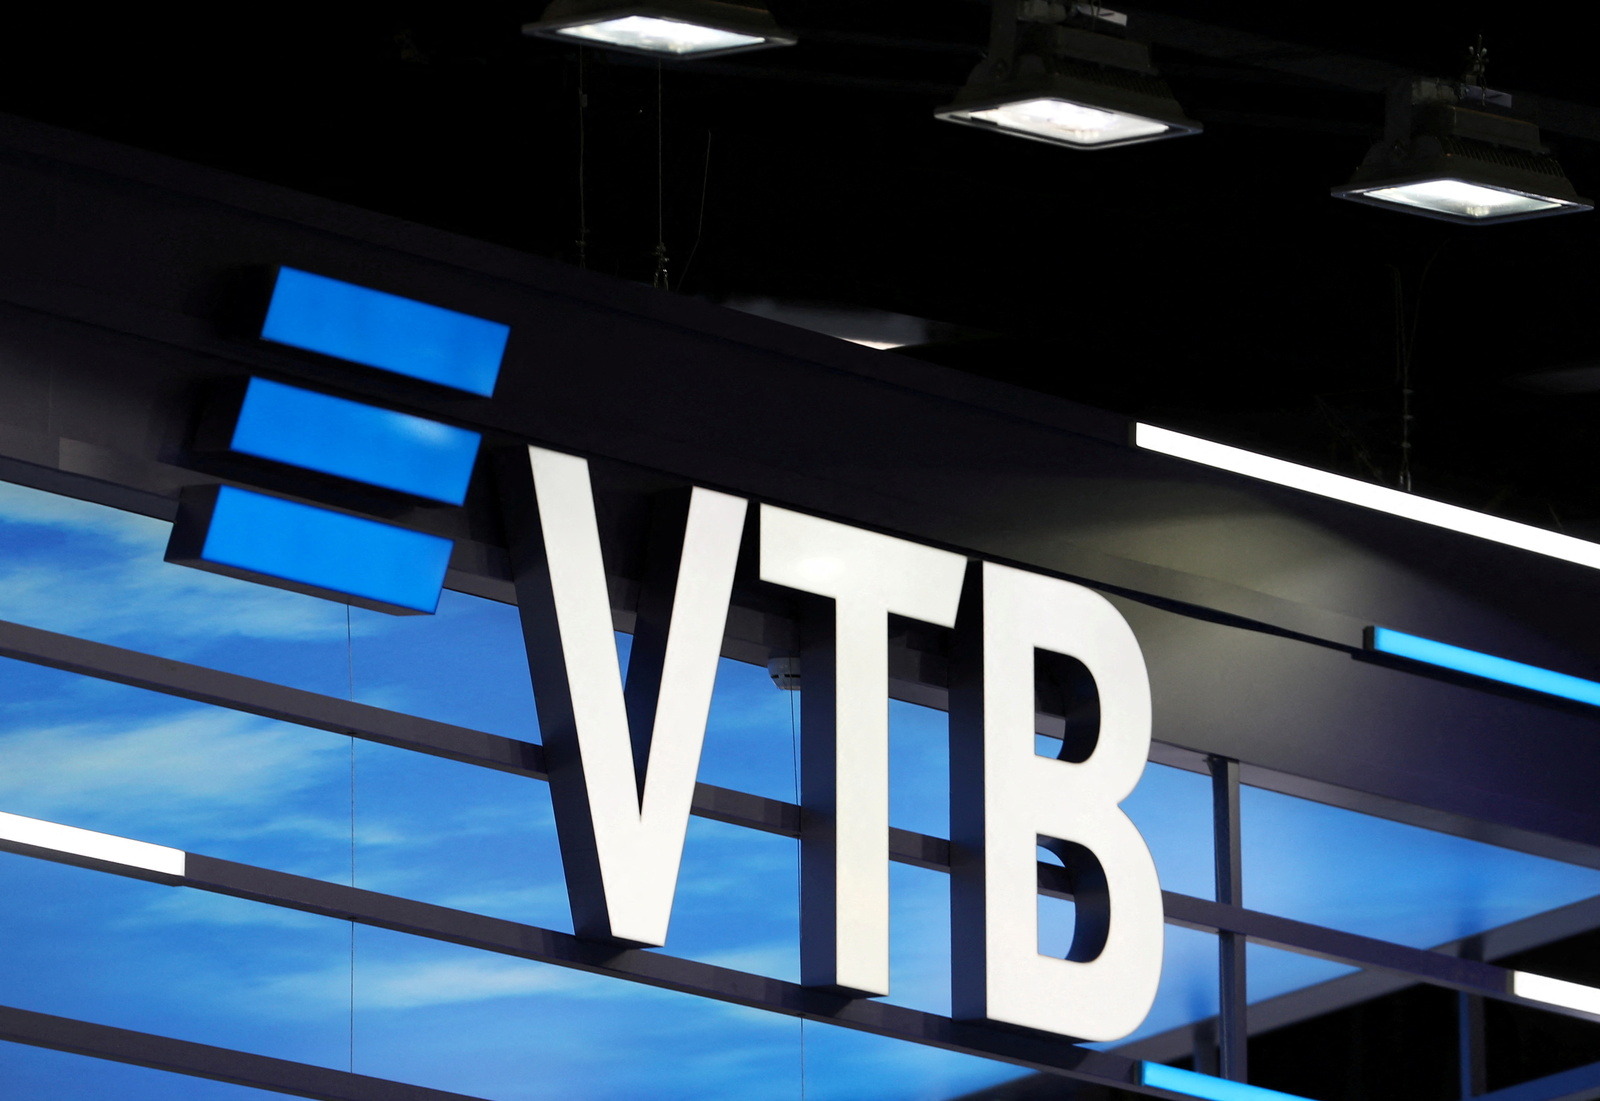 17-extraordinary-facts-about-vtb-bank